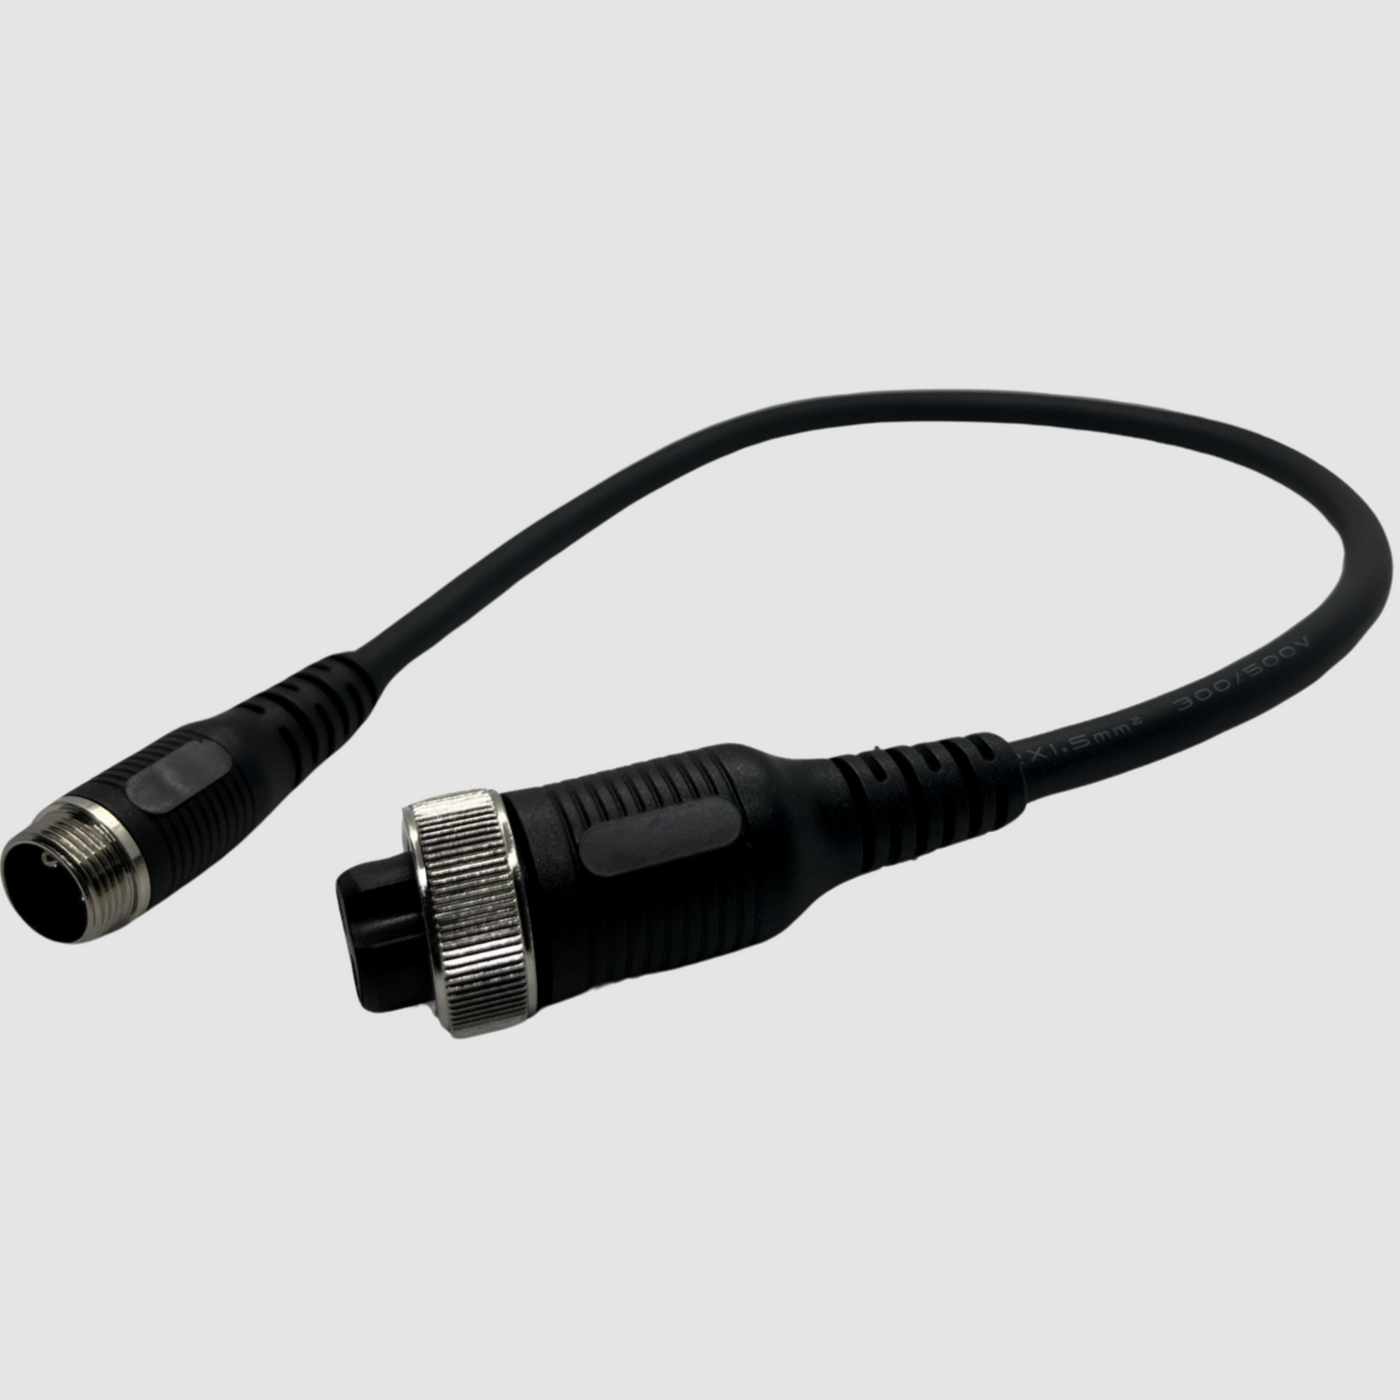 Standard Seaborg 800-1800MJ/MP3000 Adapter Cable